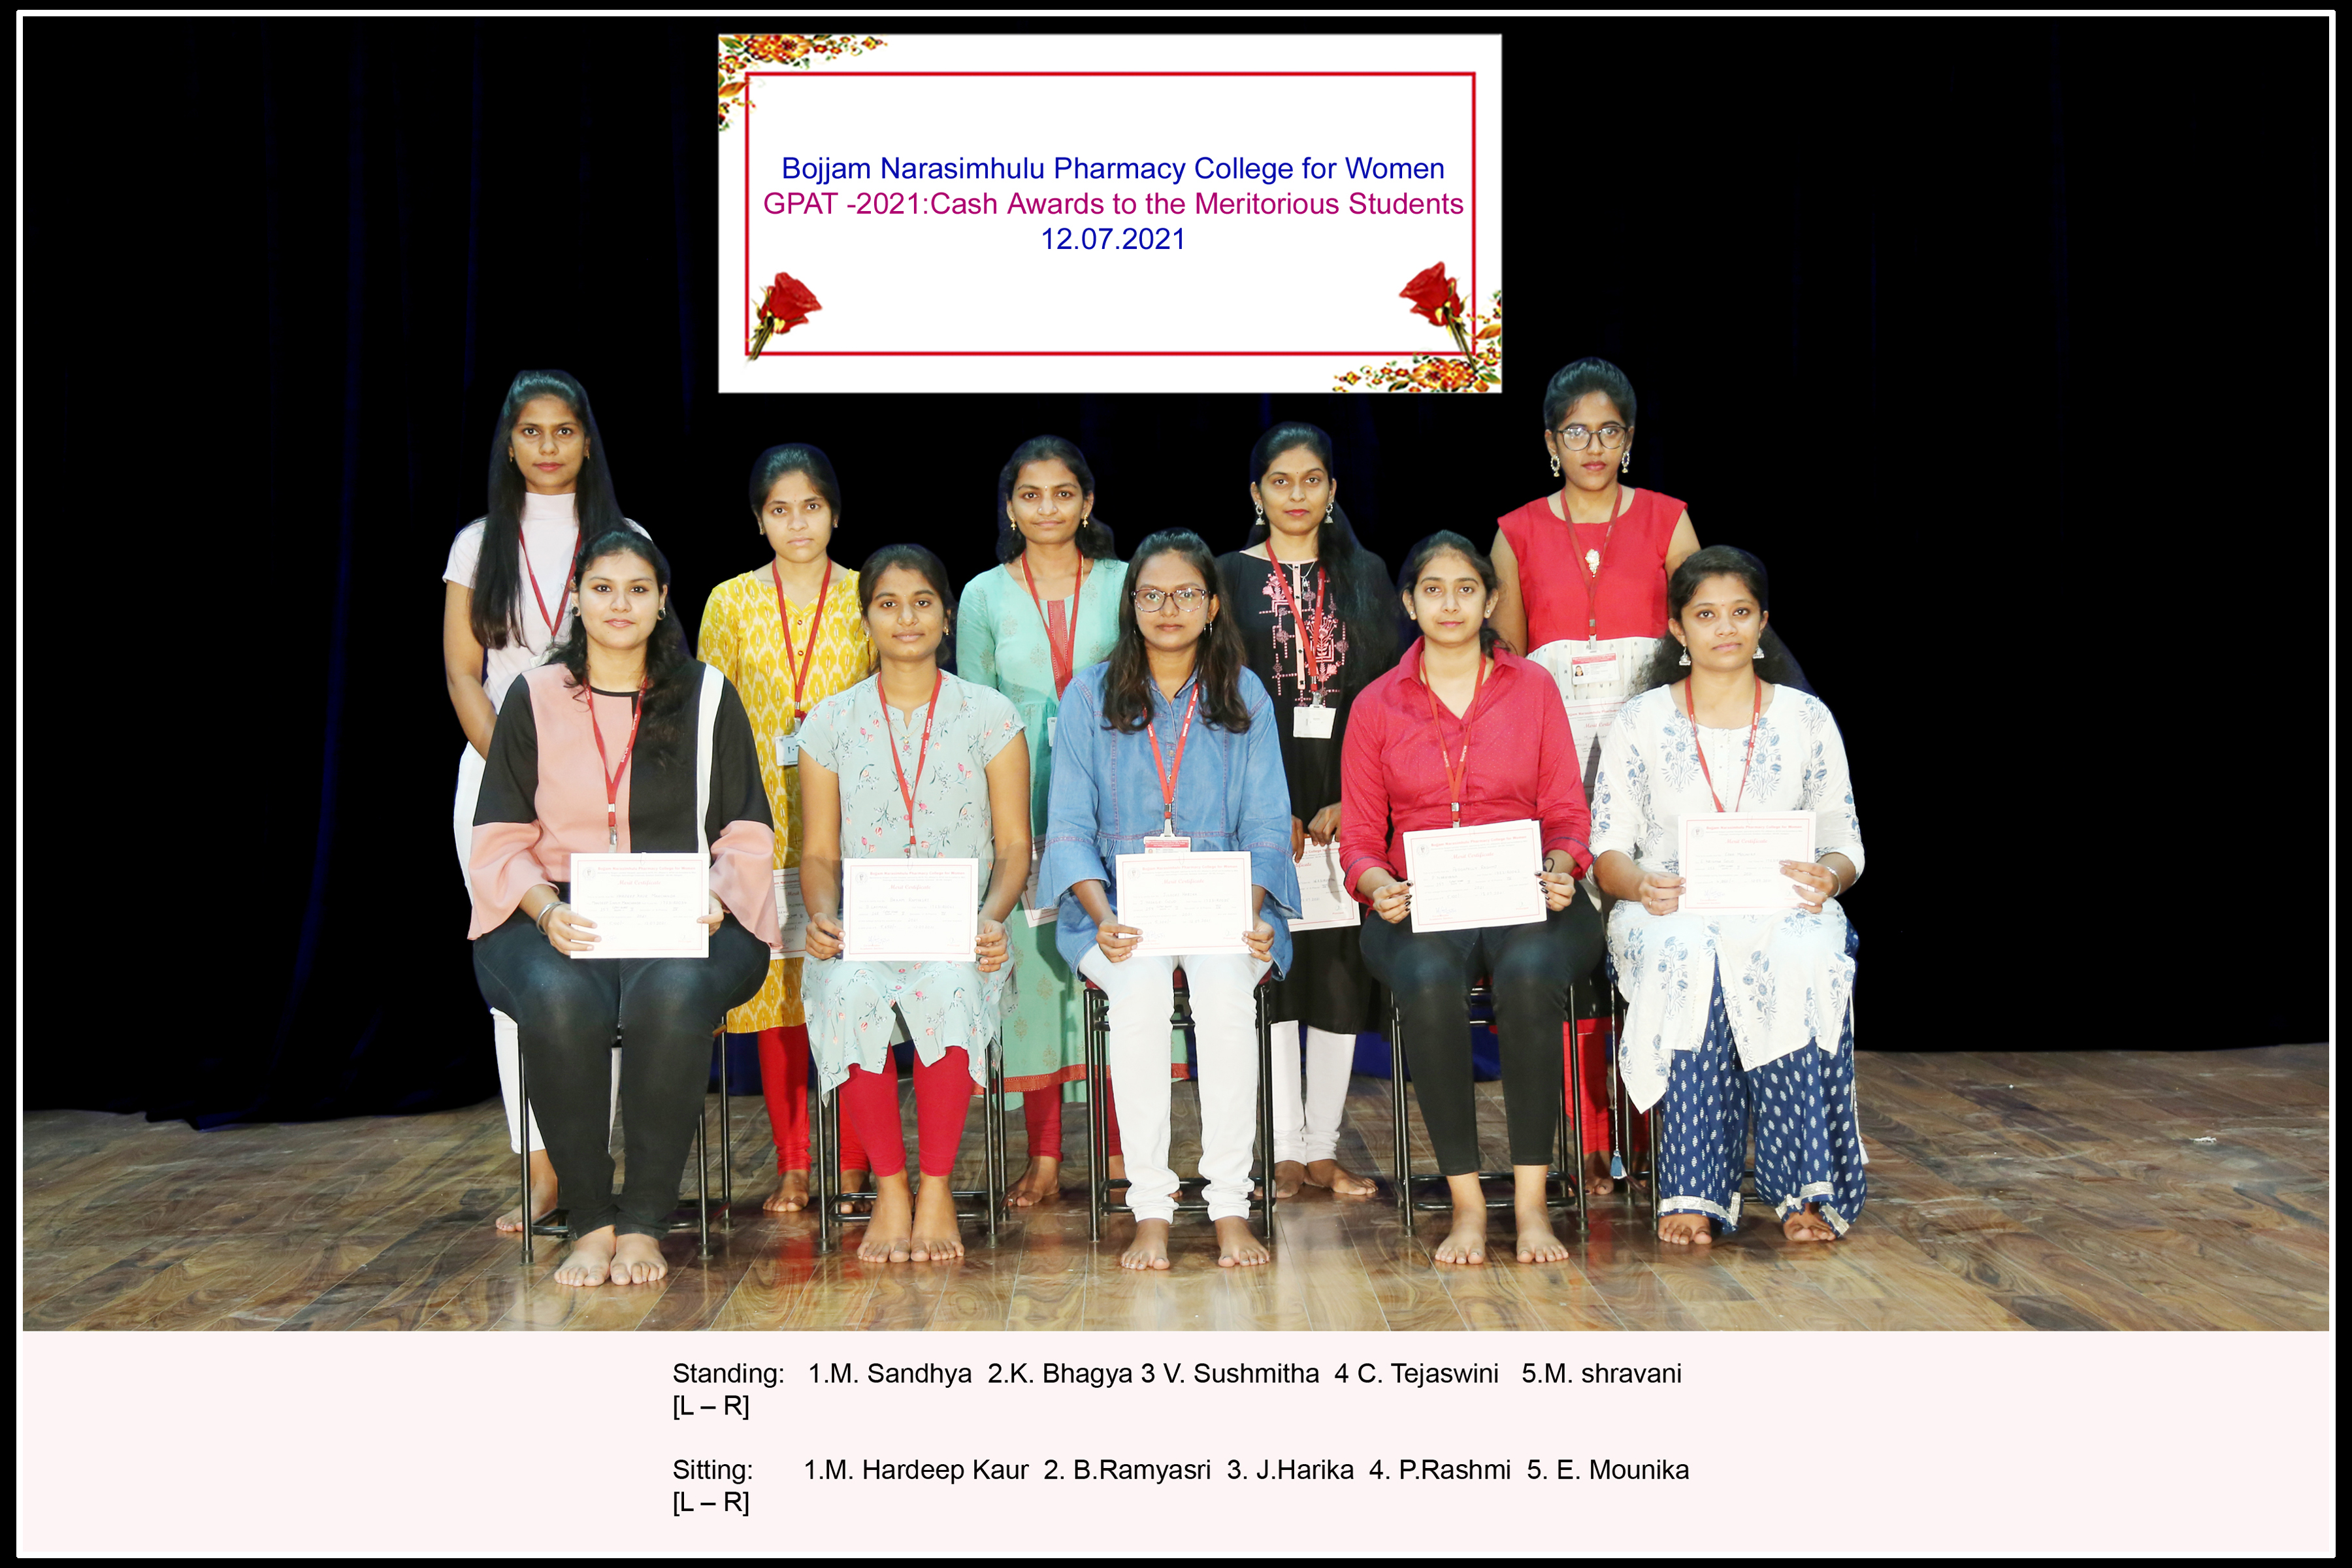 Cash Awards to Meritorious students of GPAT-2021 for the Academic Year 2020-21.